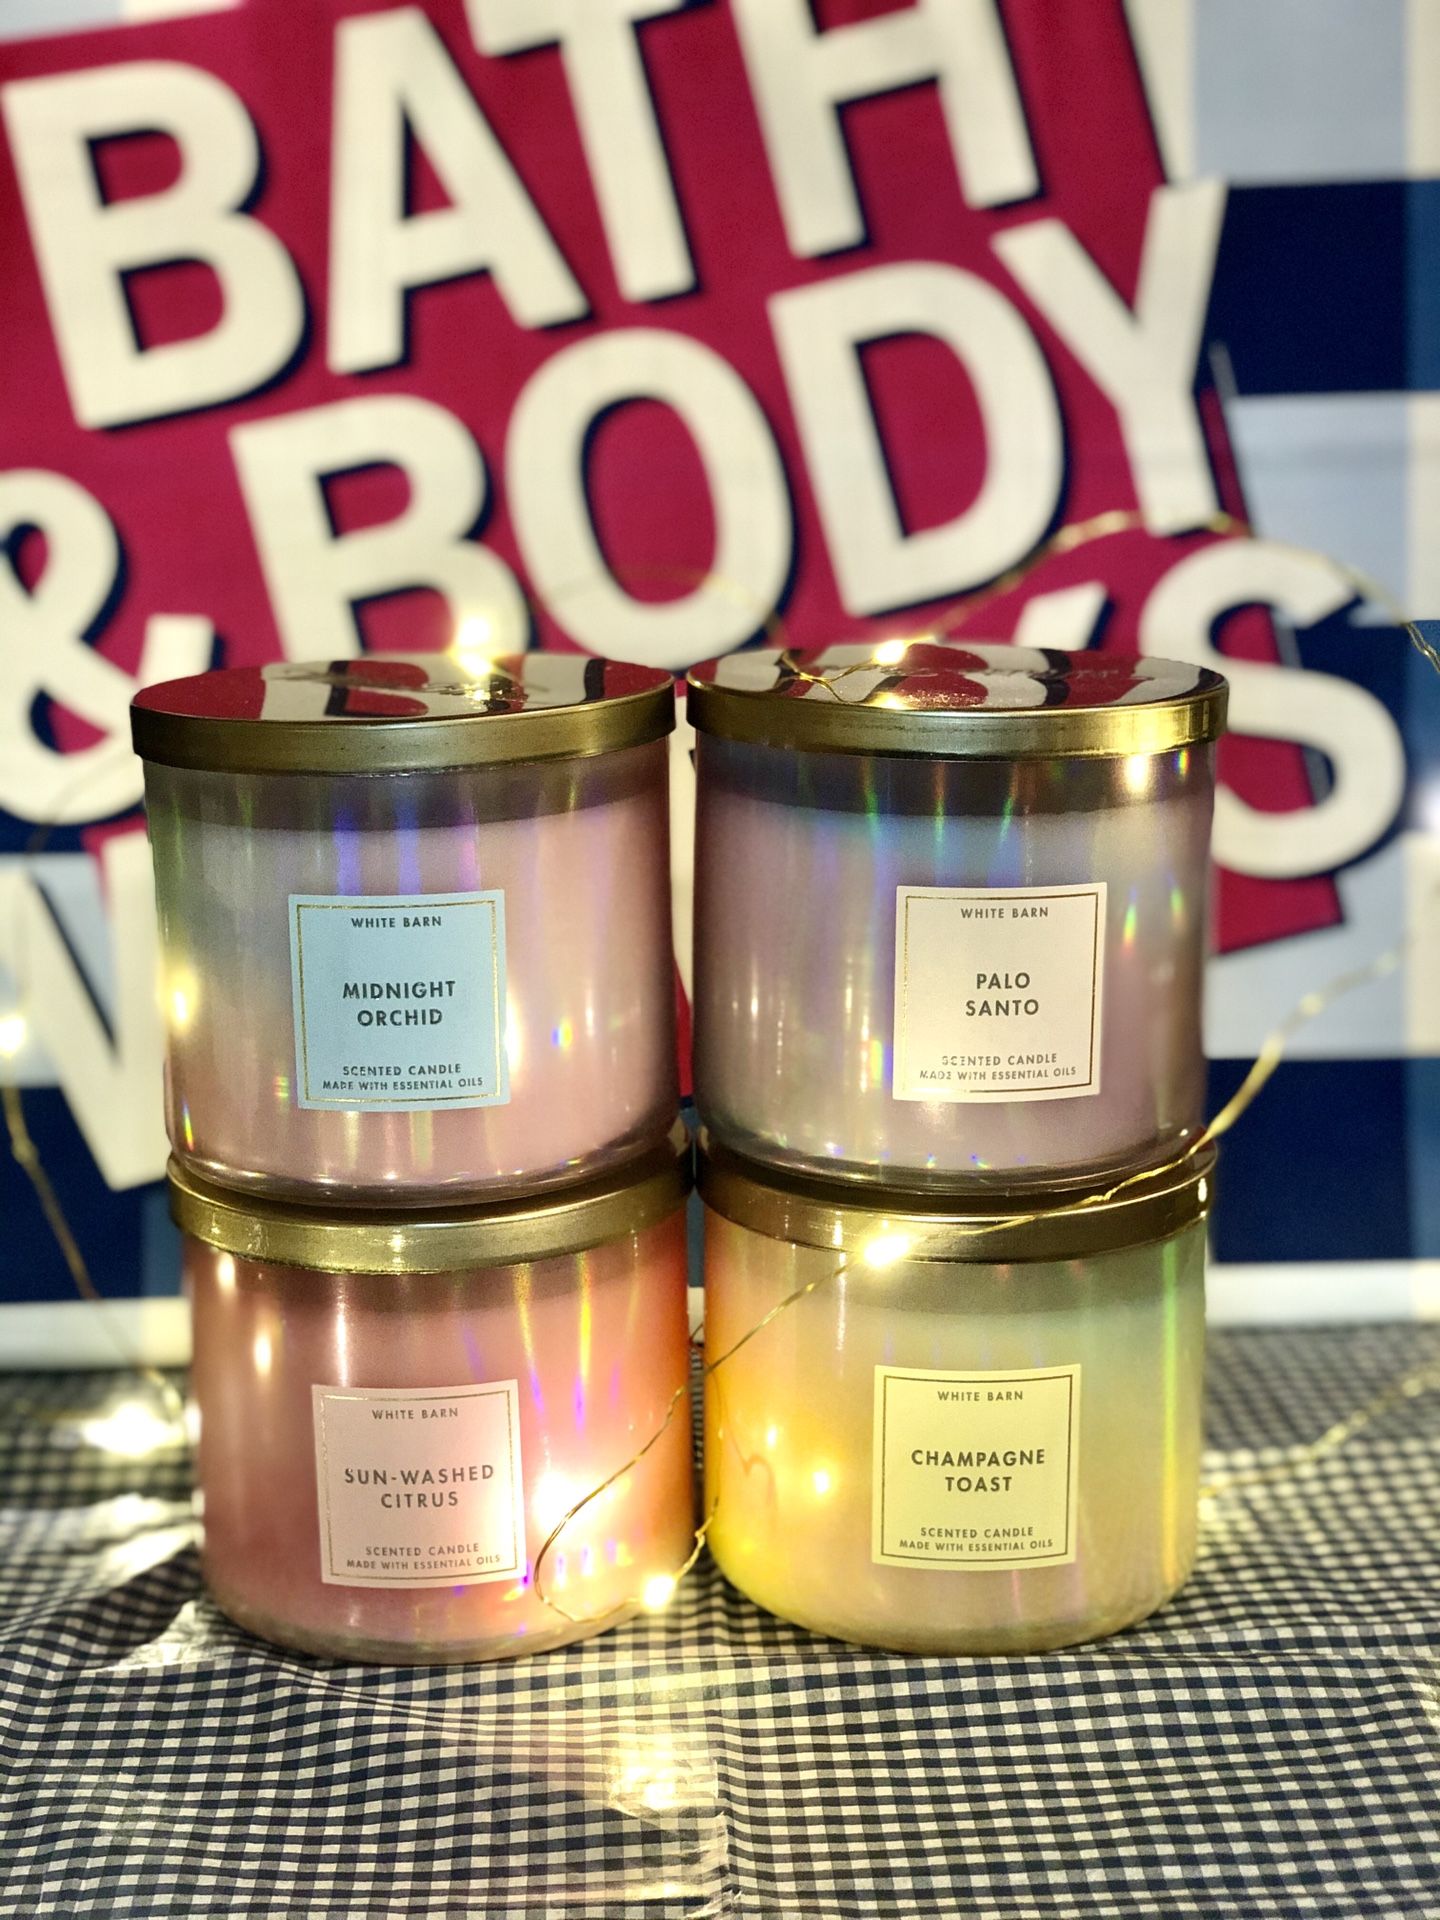 Bath and Body works candles